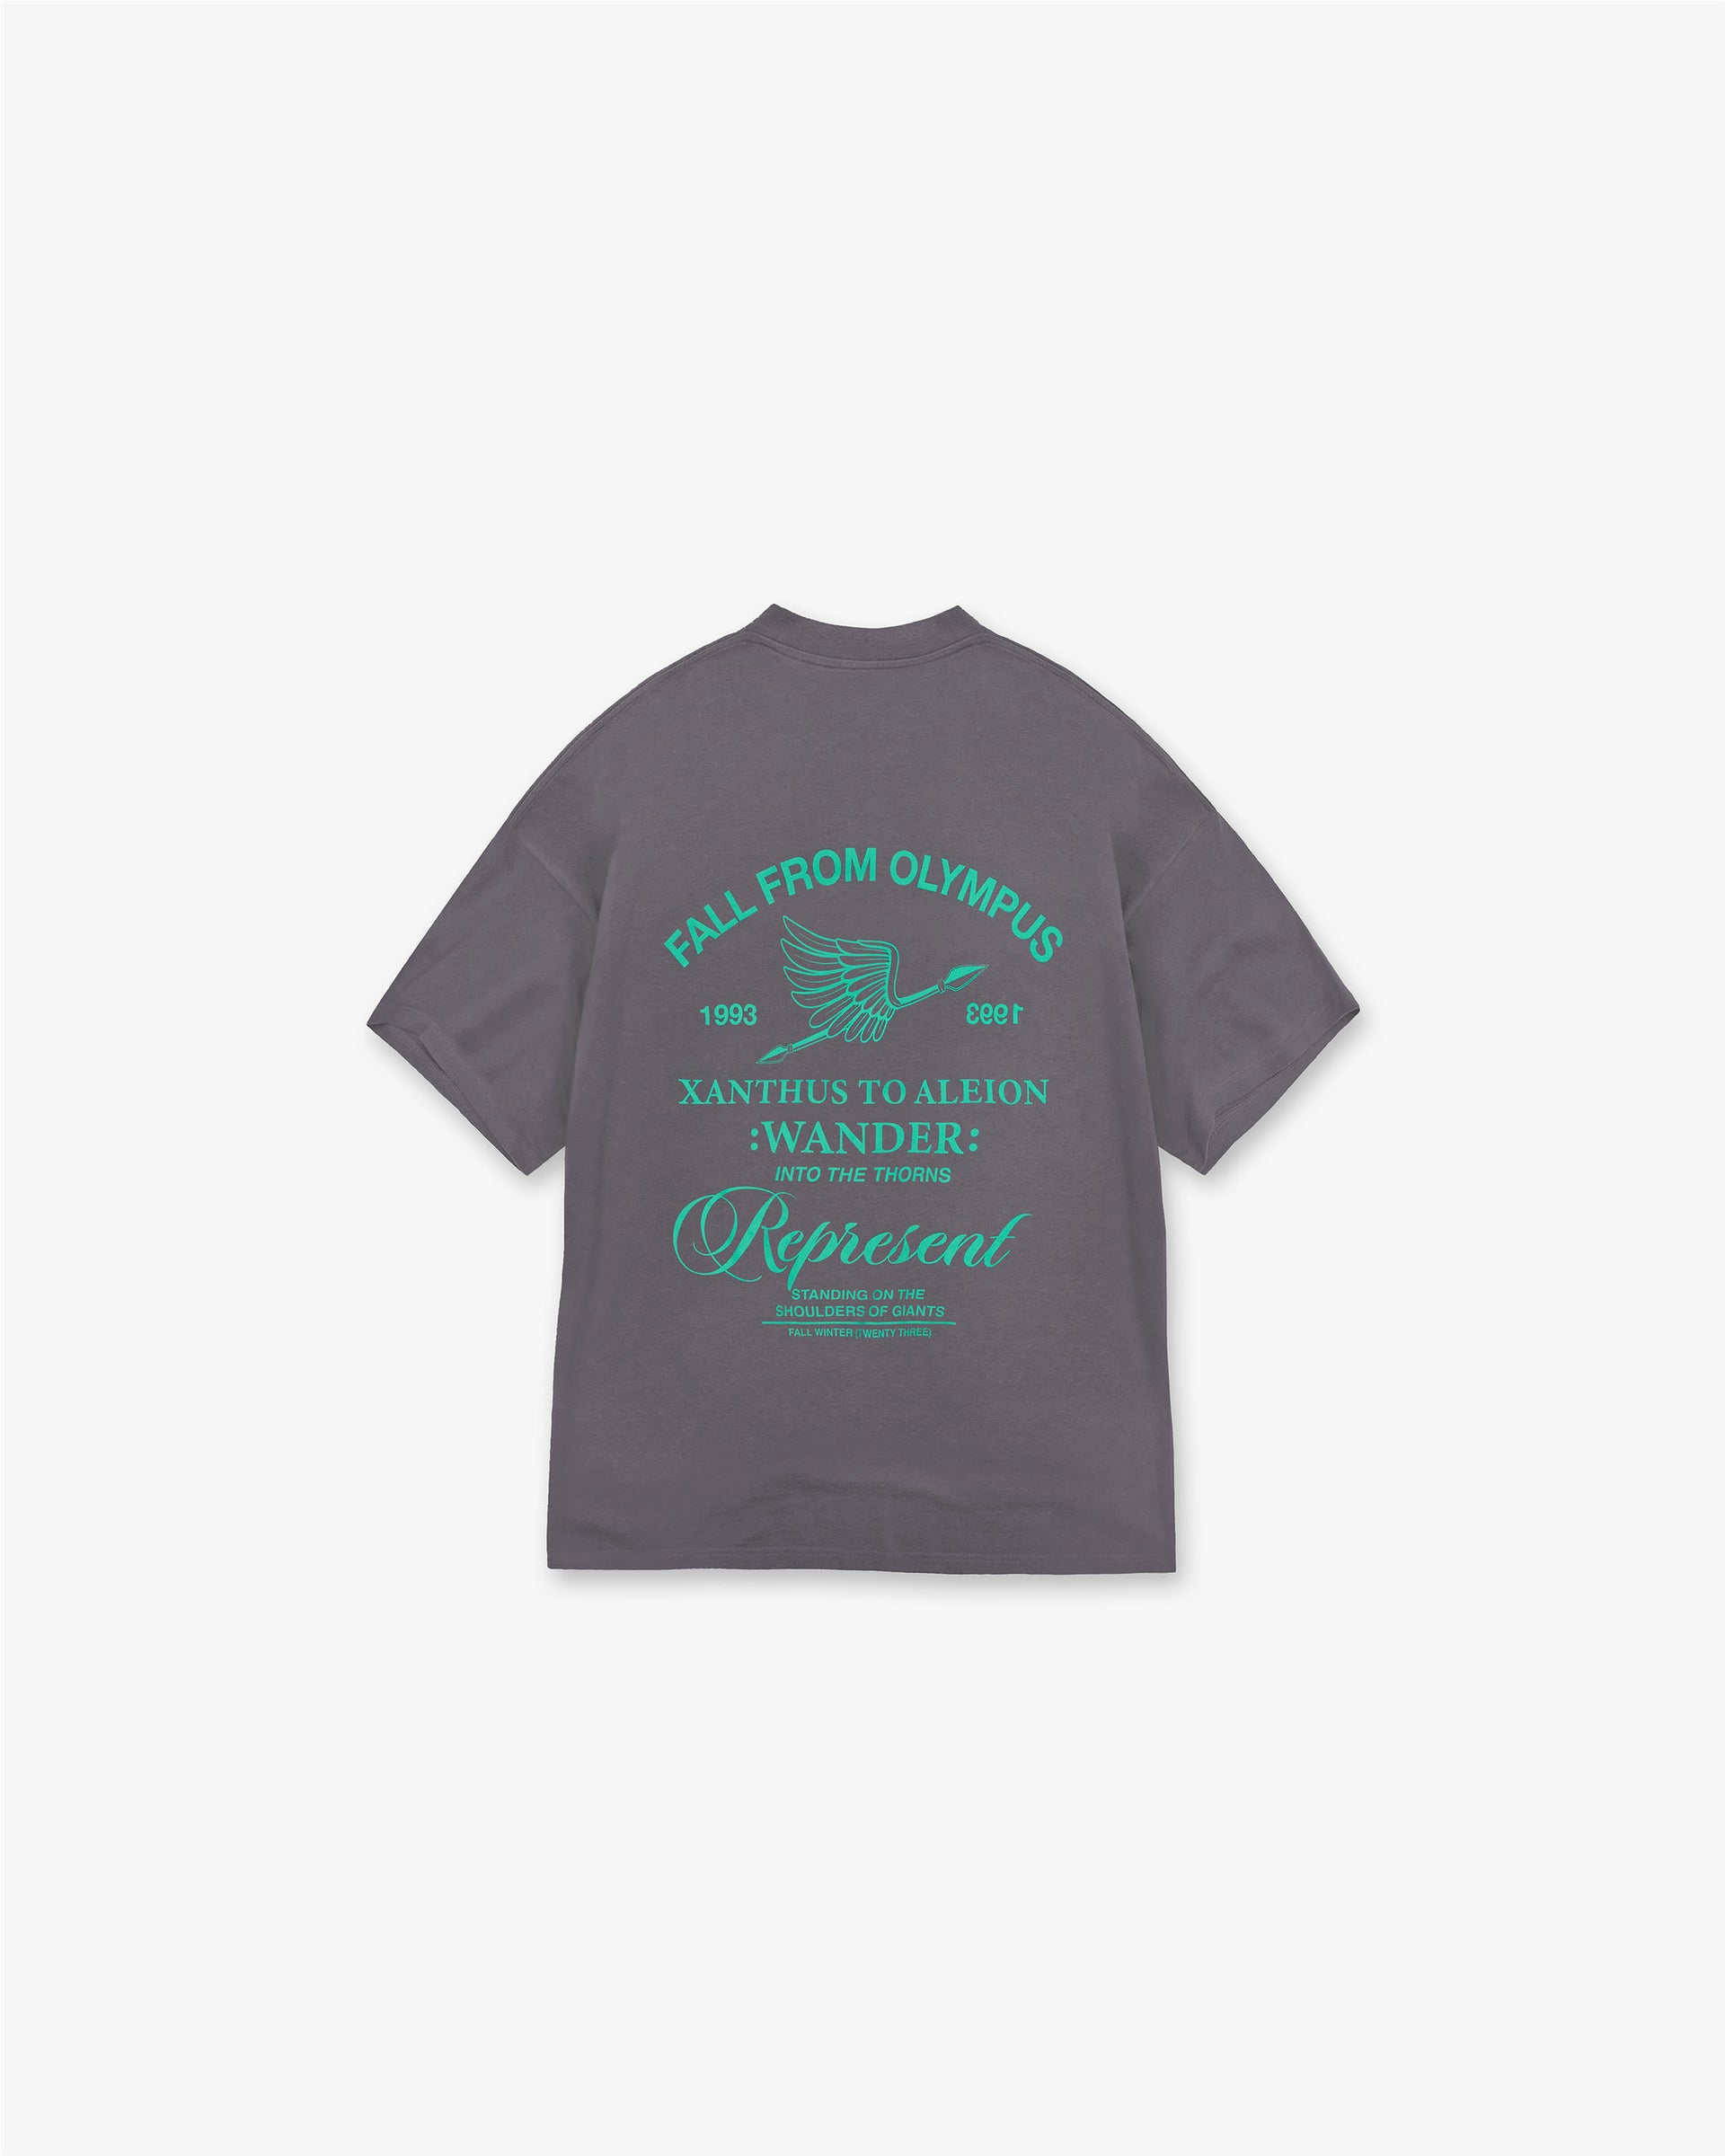 Fall From Olympus T-Shirt | Storm T-Shirts FW23 | Represent Clo